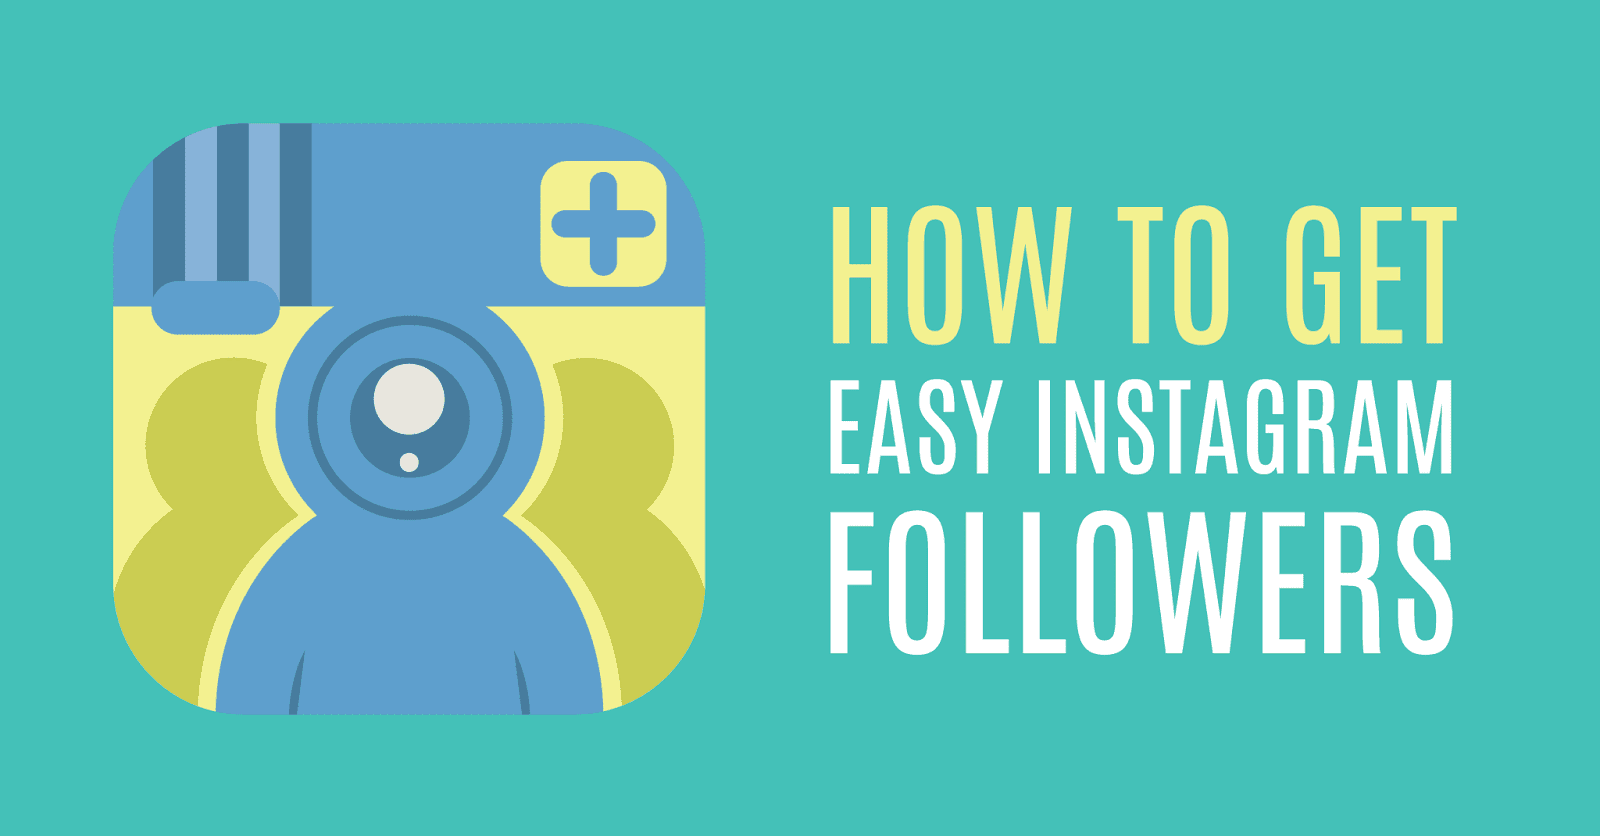 How To Increase Instagram Followers for Free